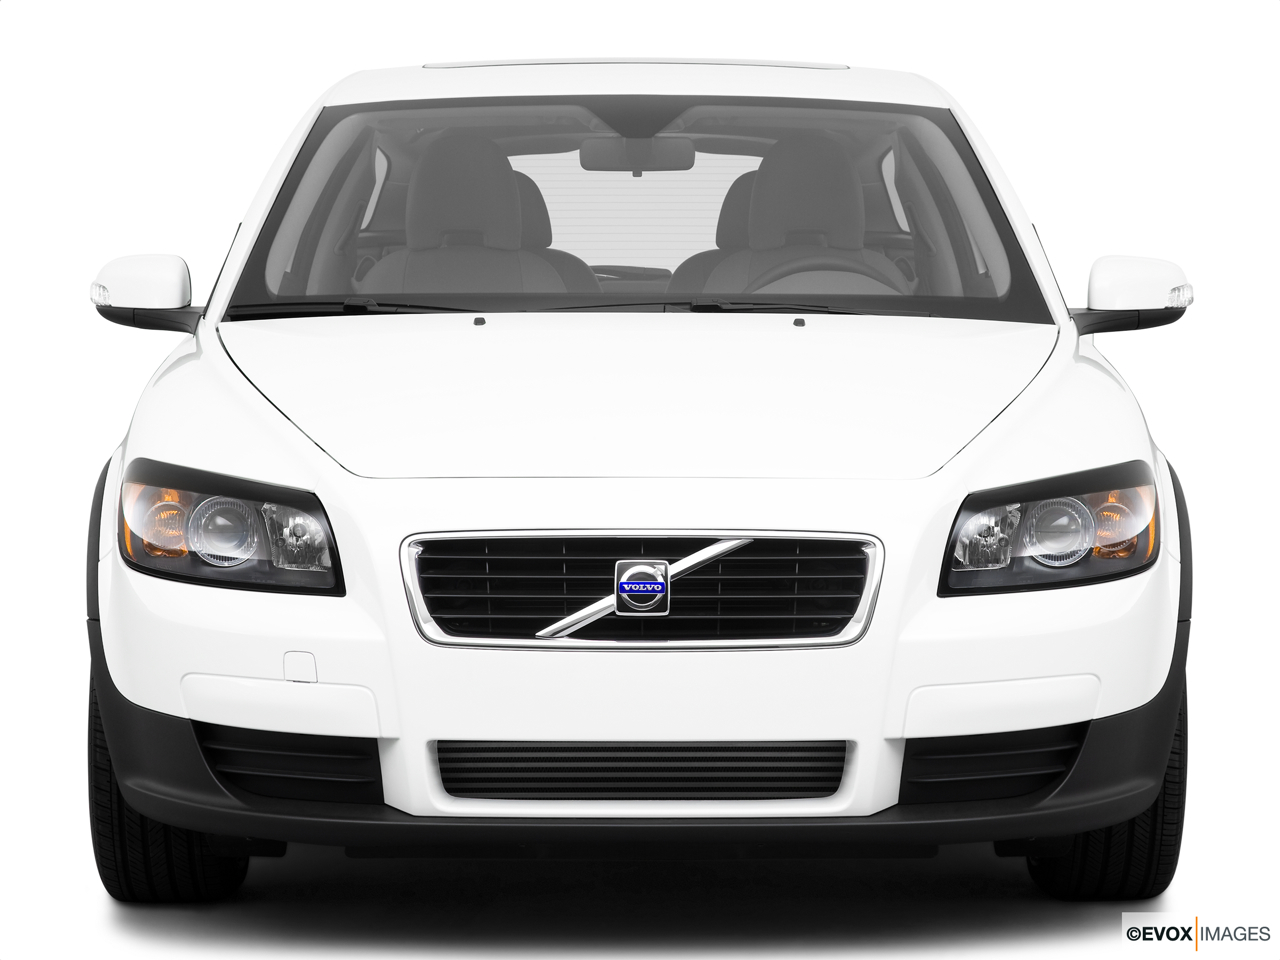 2010 Volvo C30 T5 Low/wide front. 